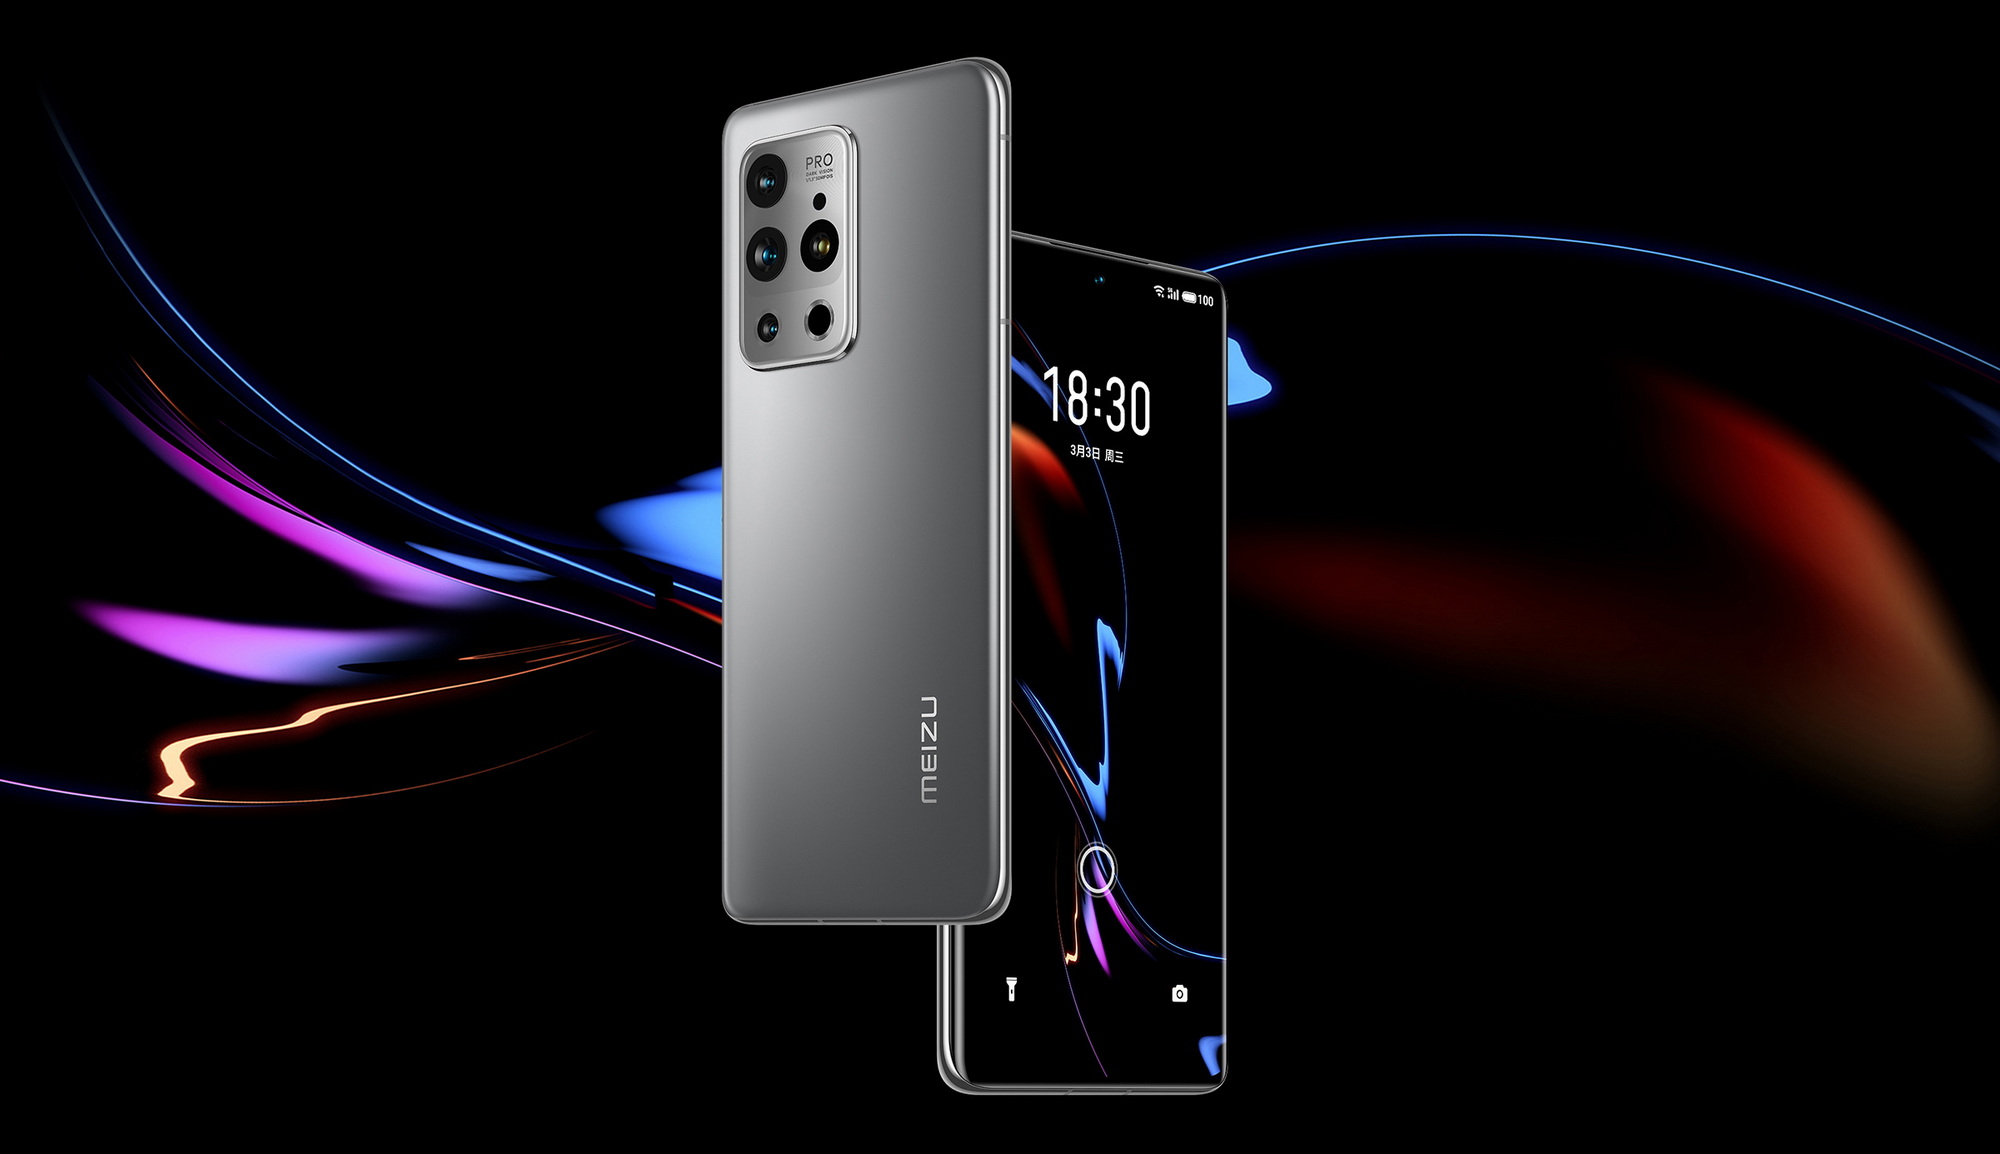 Snapdragon 888+, advanced camera, WQHD+ screen and 4,500mAh battery - Meizu 18s Pro specifications published